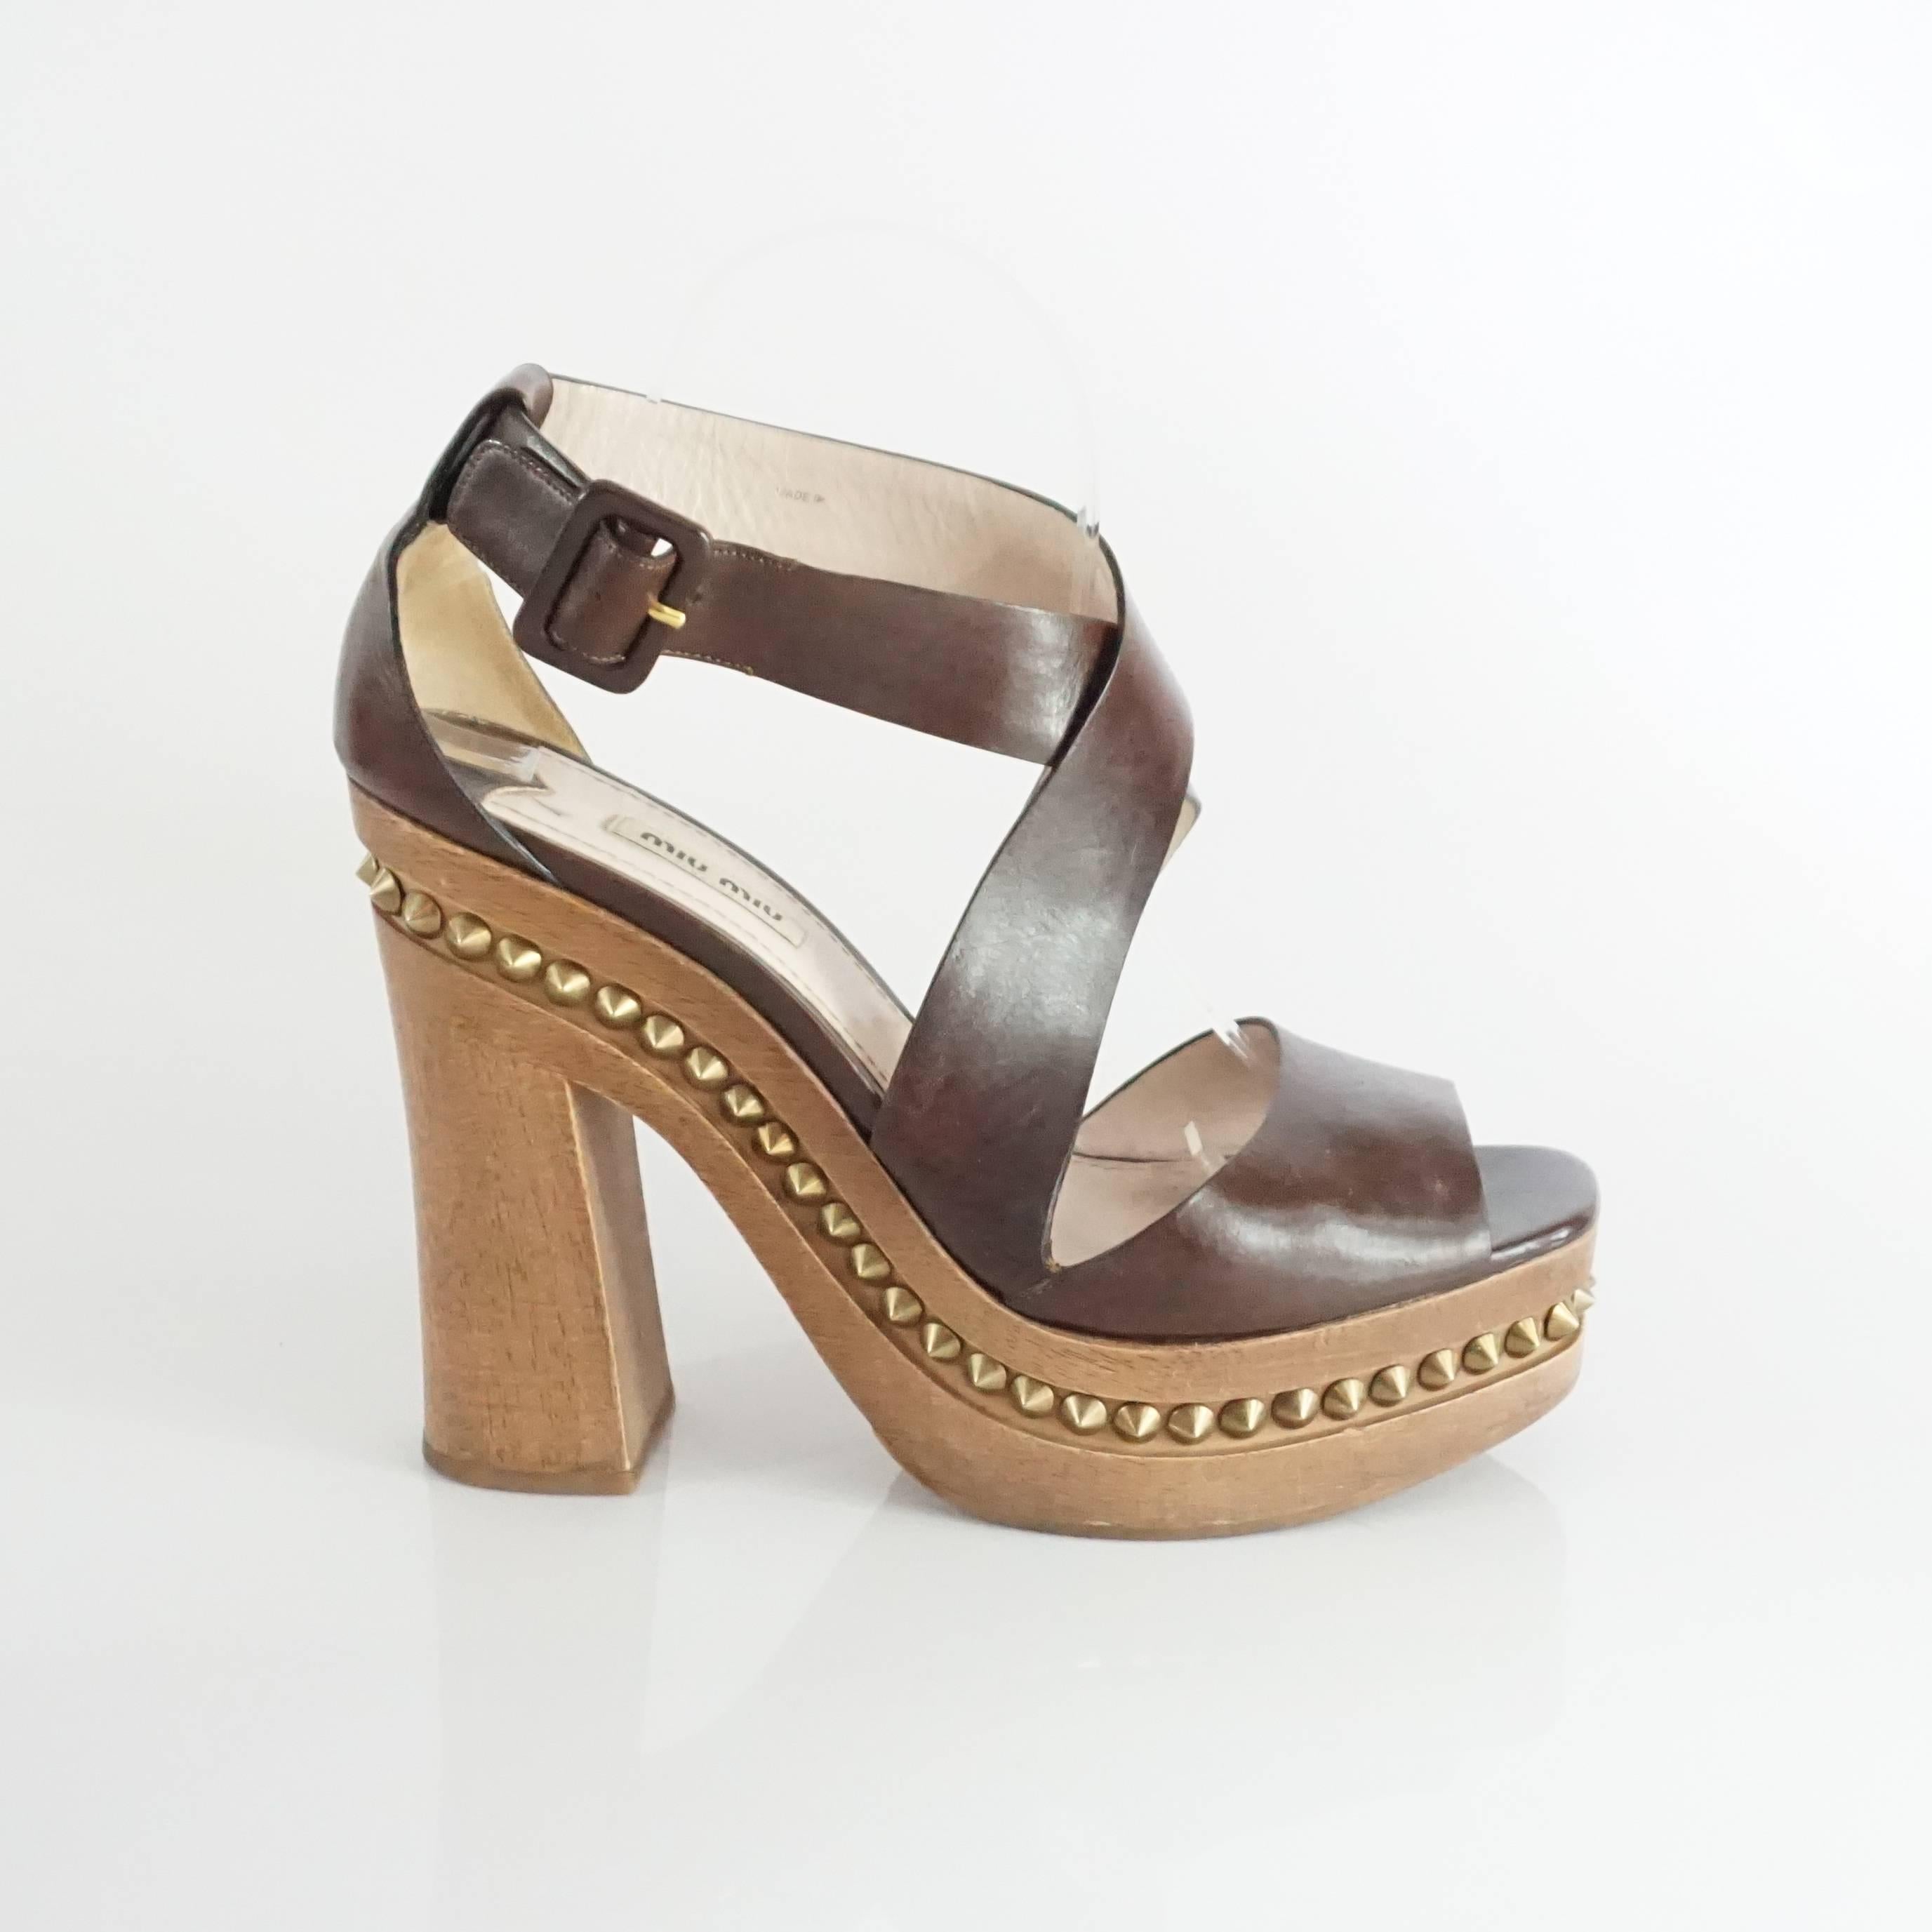 These Miu Miu heels have a strappy brown leather design. There is a wooden platform and wooden chunky heel with flat gold spikes. The shoes are in fair condition and have wear on the wood and leather (all shown in the last images). Size 41. 

Heel